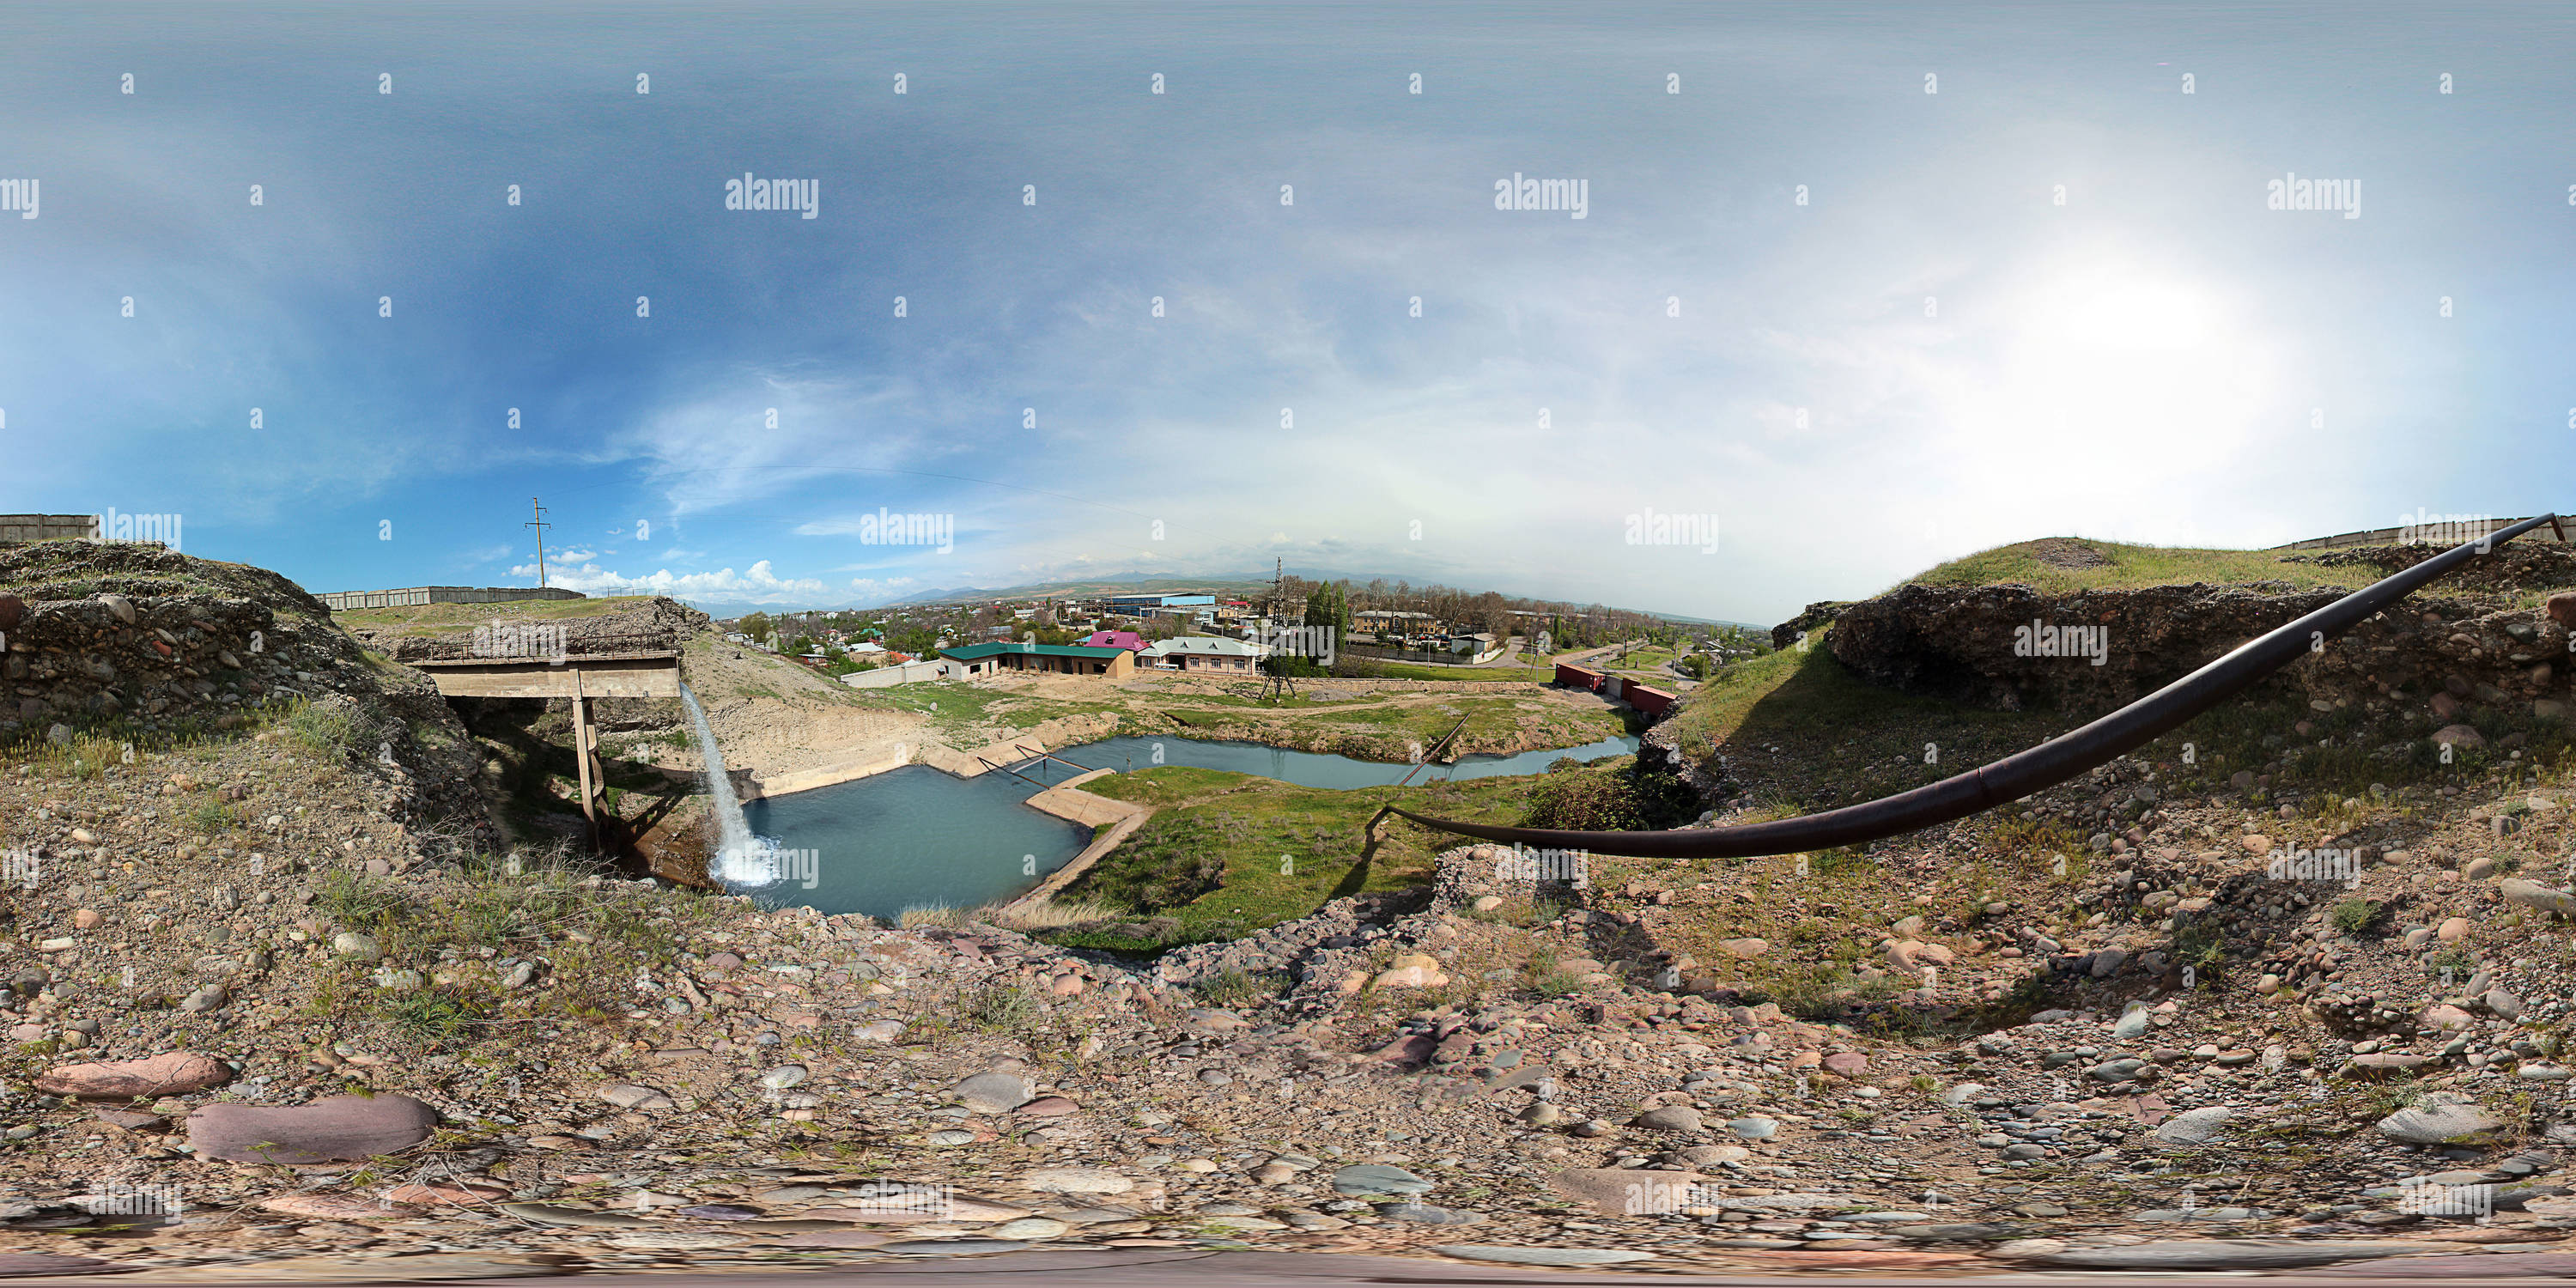 360 degree panoramic view of Man-made waterfall in the Lesosklad.